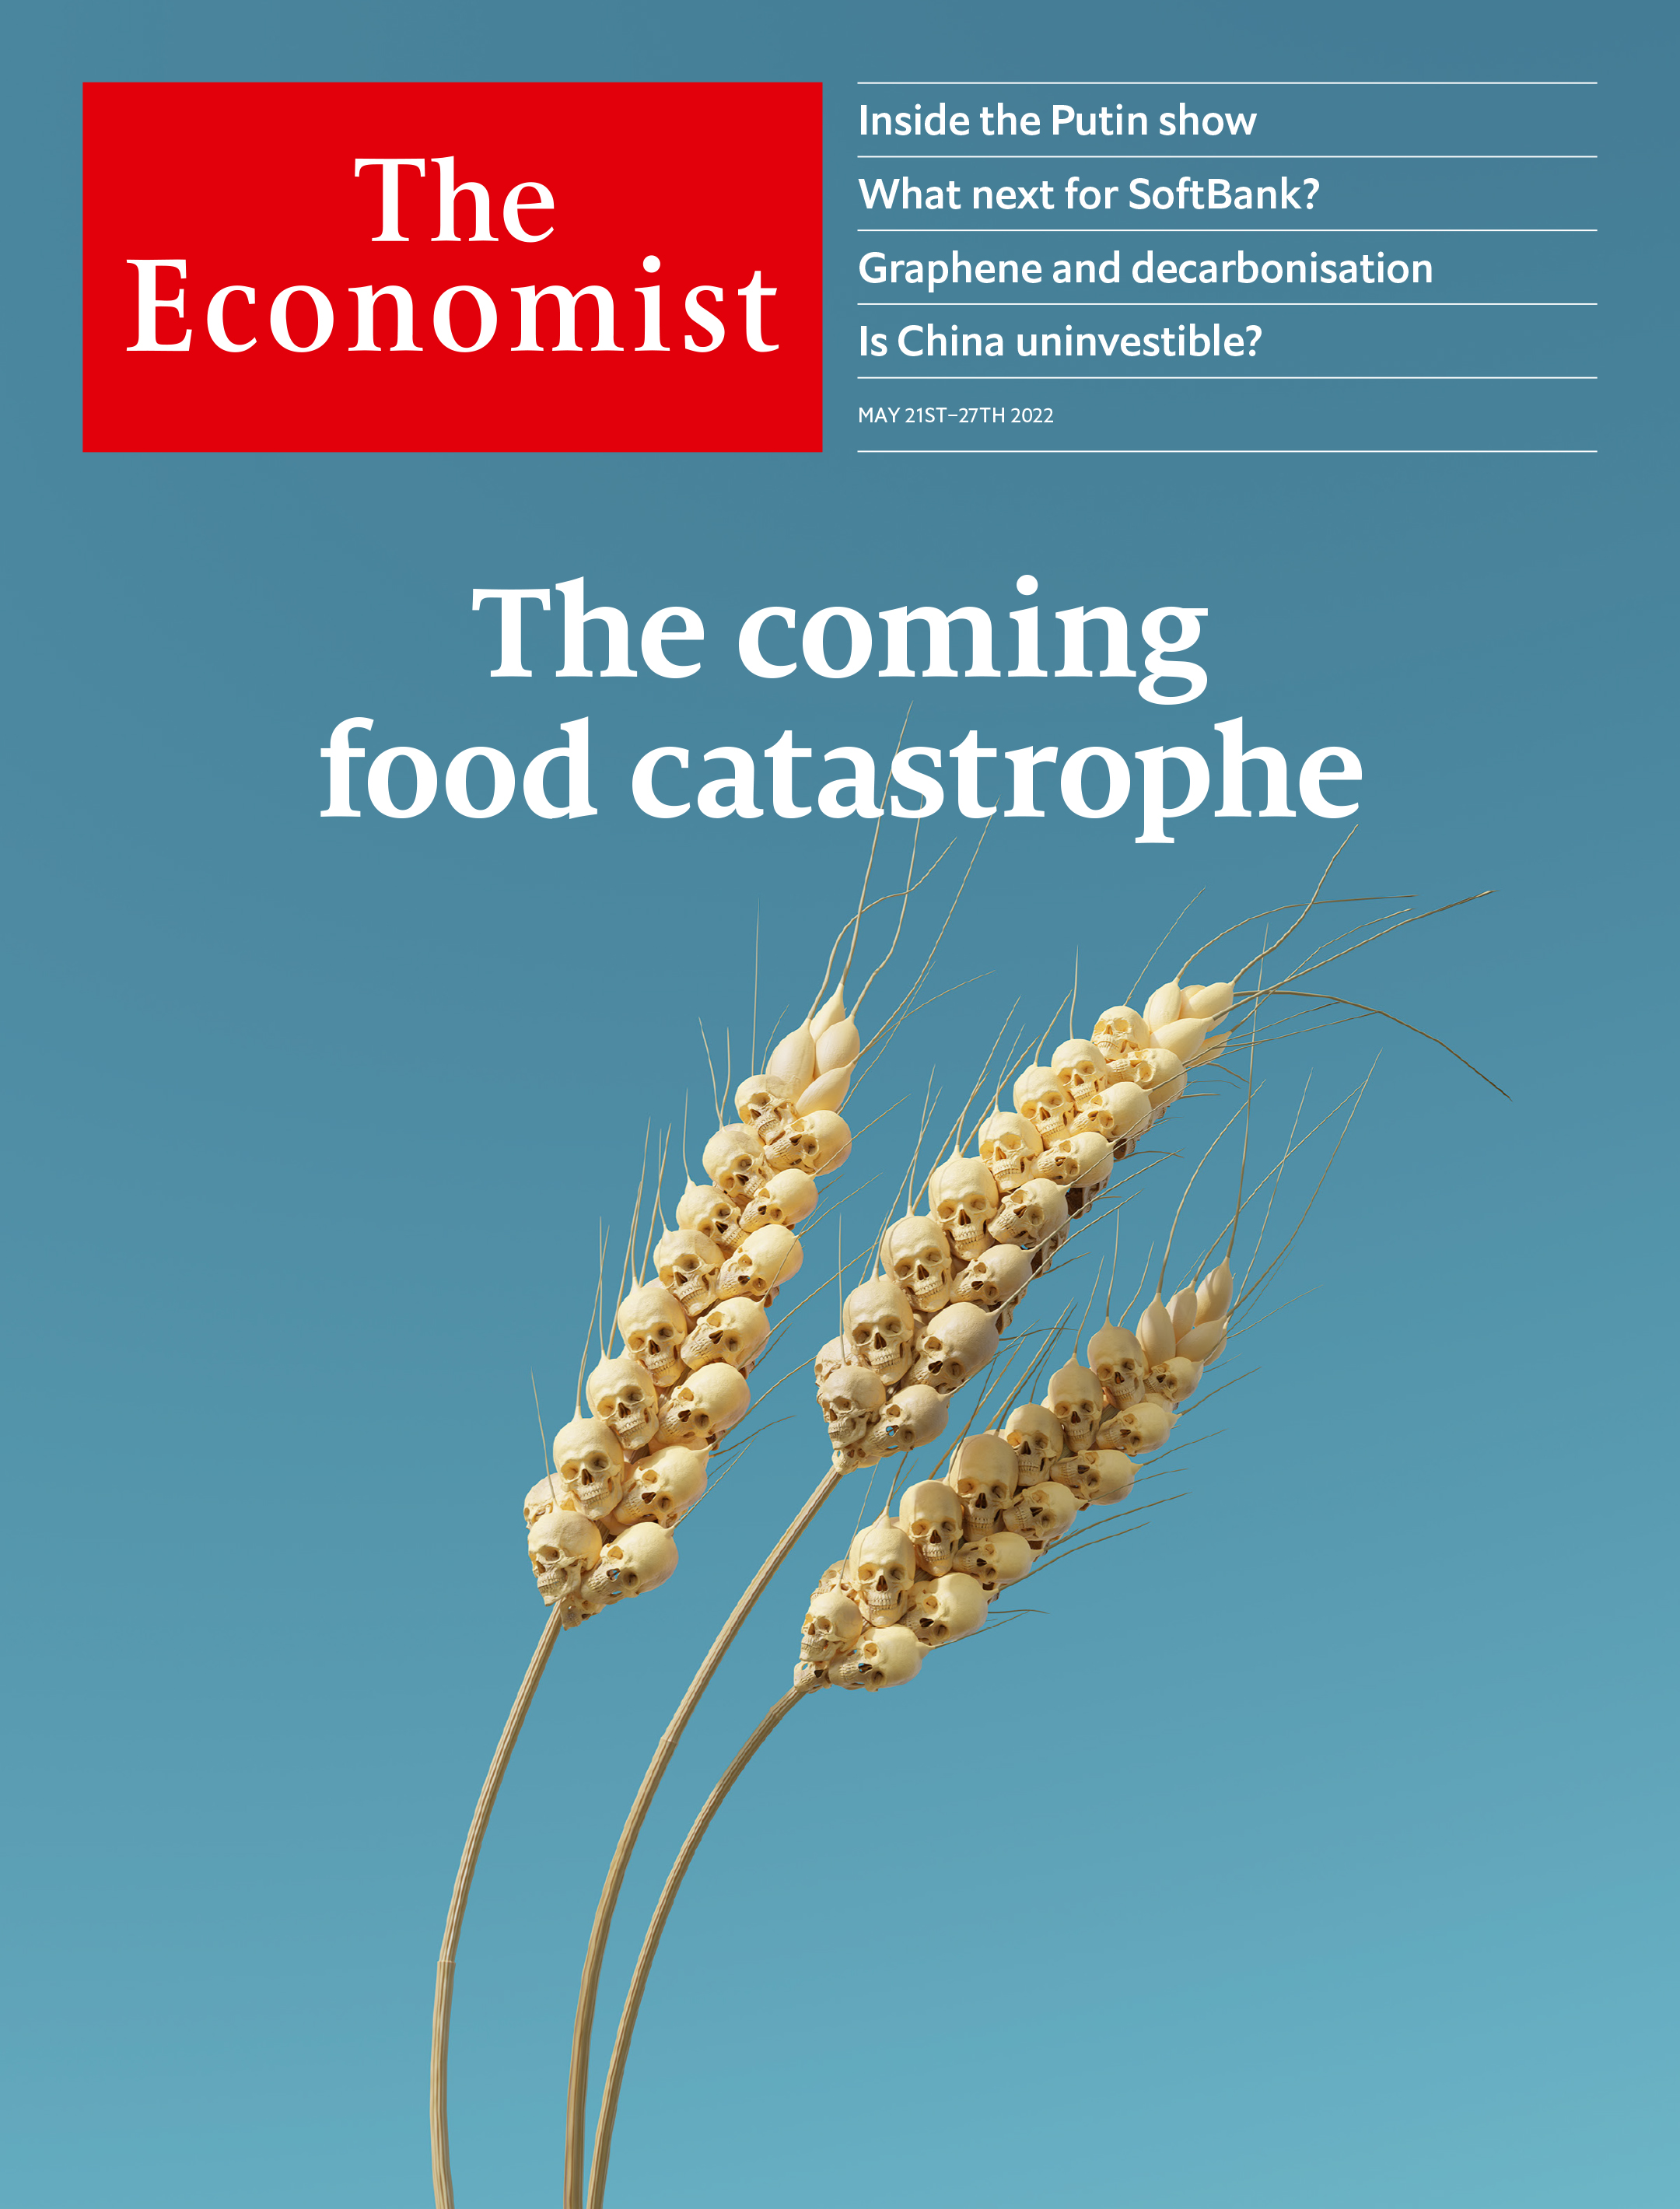 The Economist - “The Coming Food Catastrophe” May 21–27, 2022